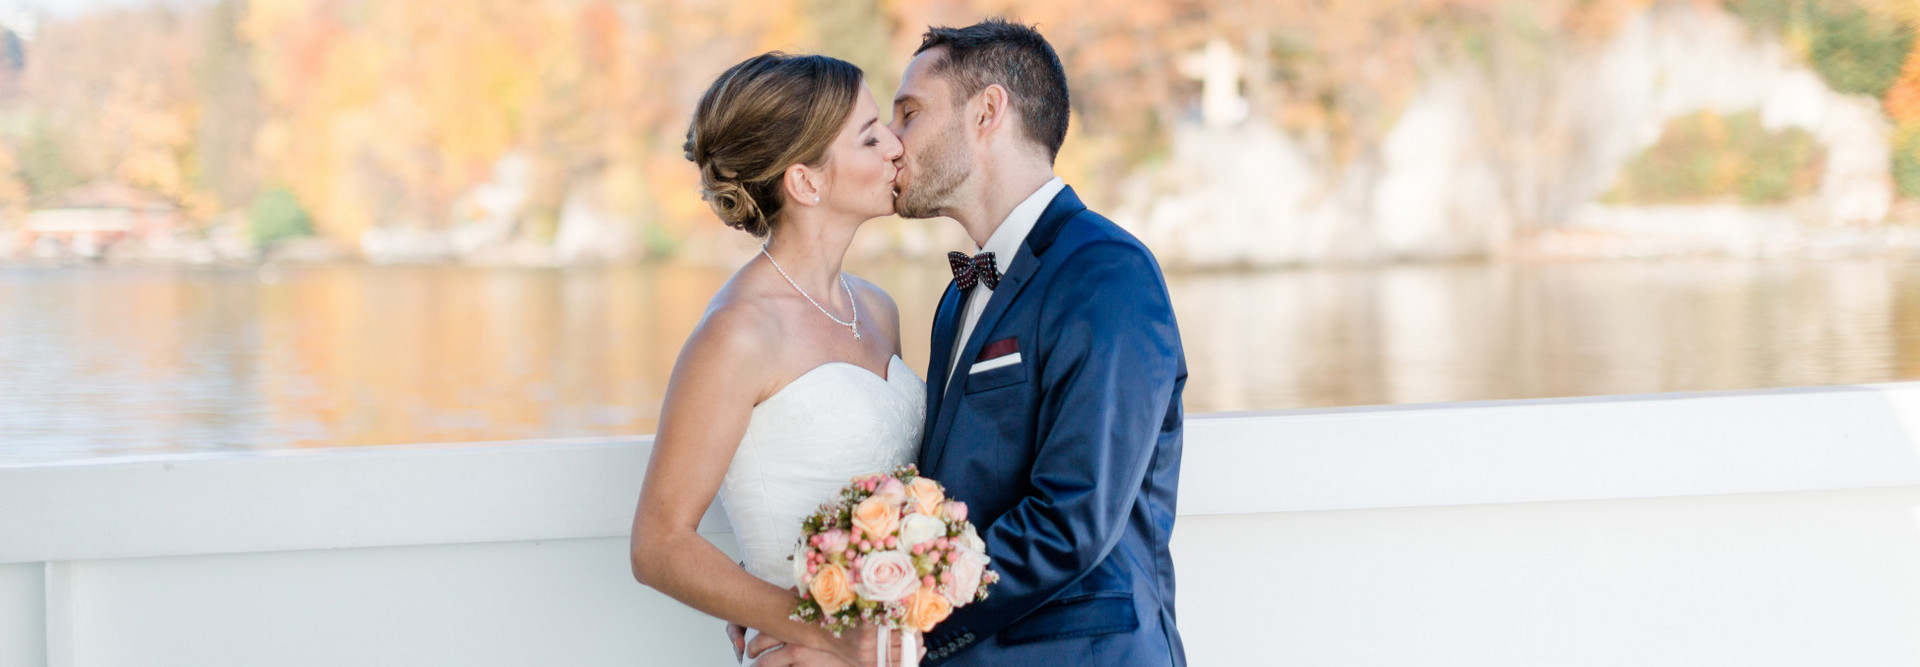 The bride and groom kiss outside on the ship. In the background the lake and the forest with coloured leaves can be seen blurred.